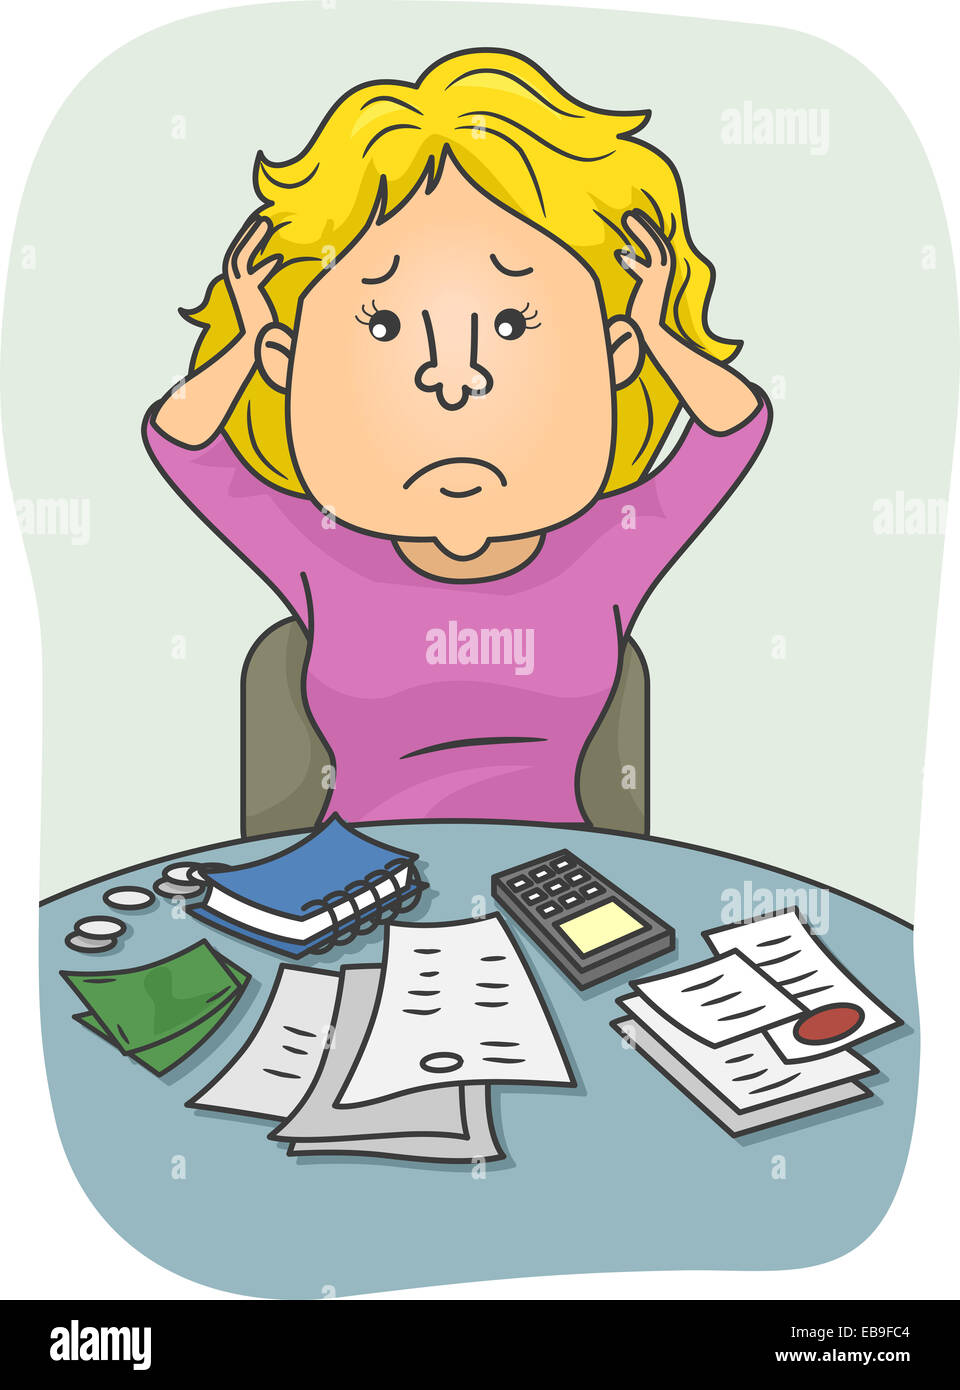 Illustration Featuring a Woman Confused Over Her Finances Stock Photo